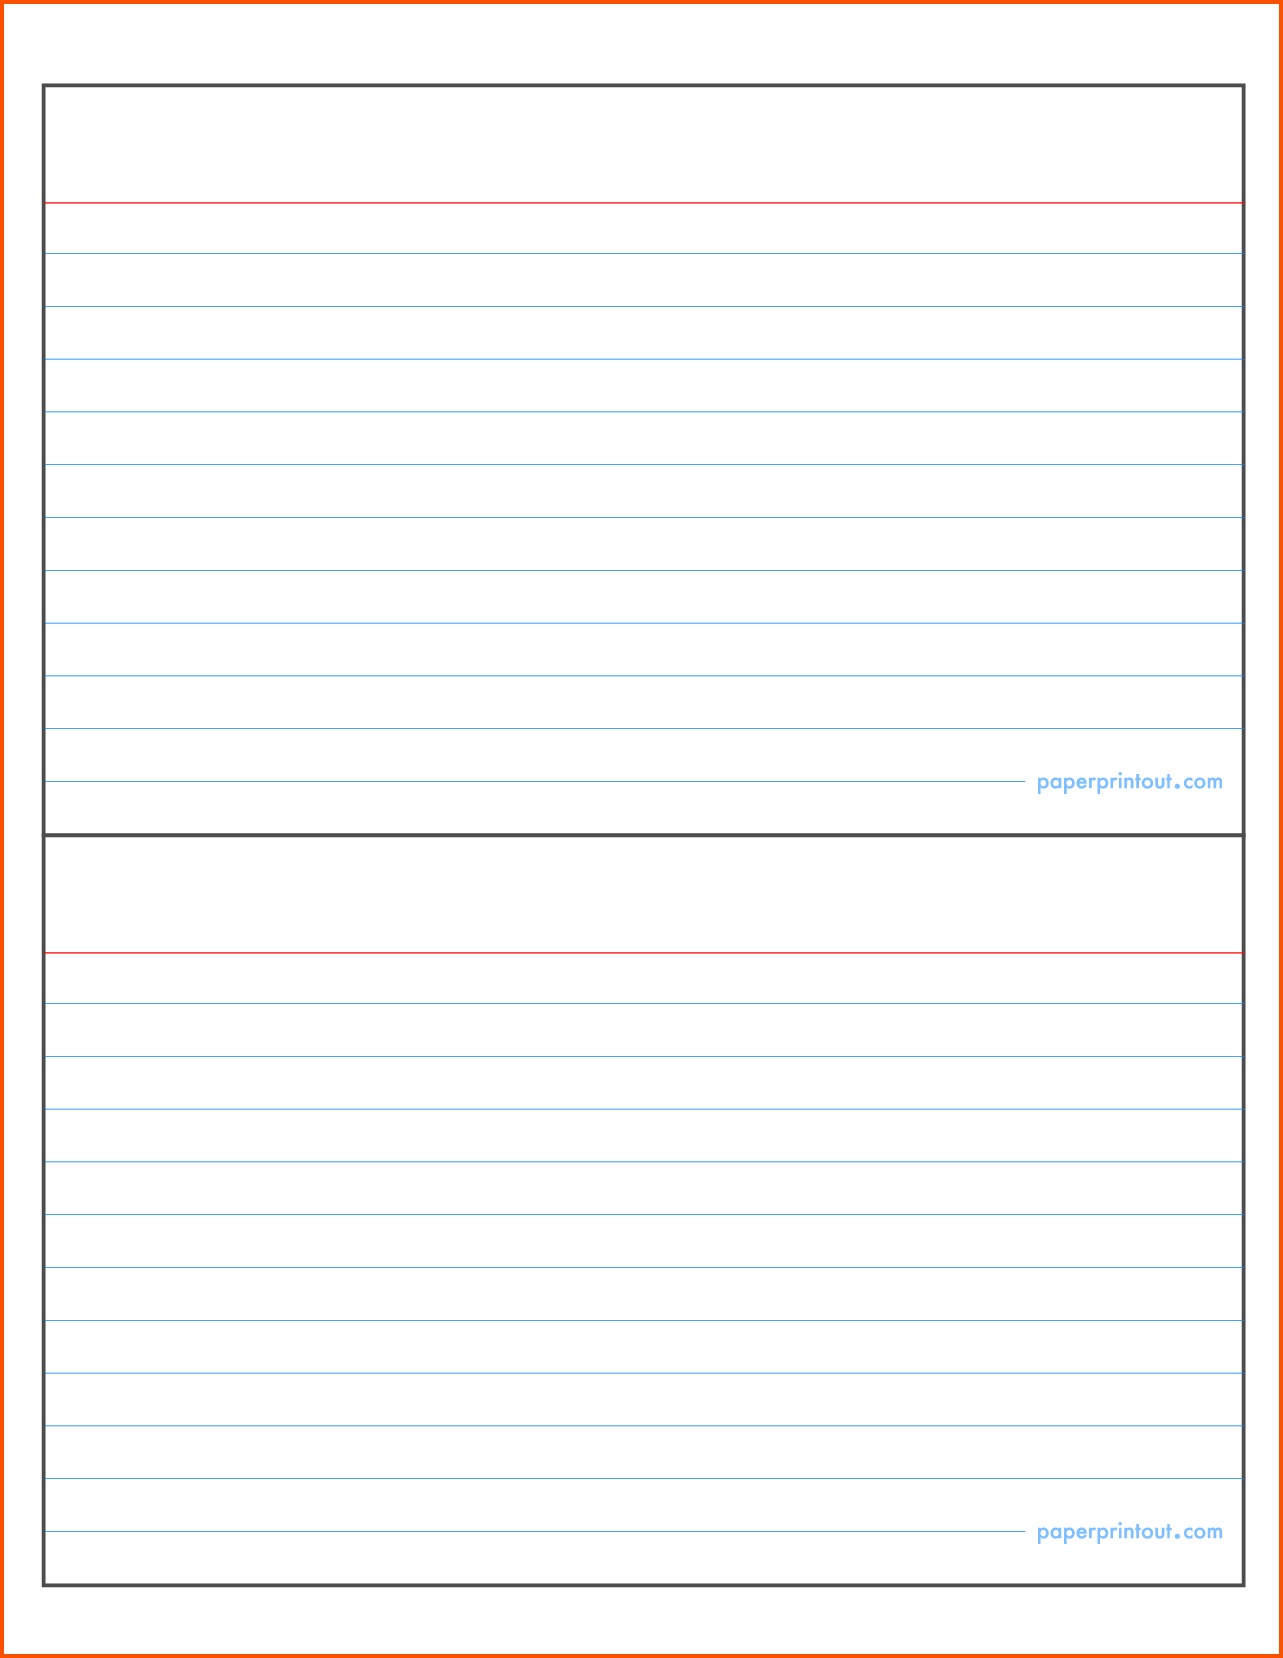 003 Template Ideas Word Indexs 127998 Impressive Index Card With Regard To 3 X 5 Index Card Template